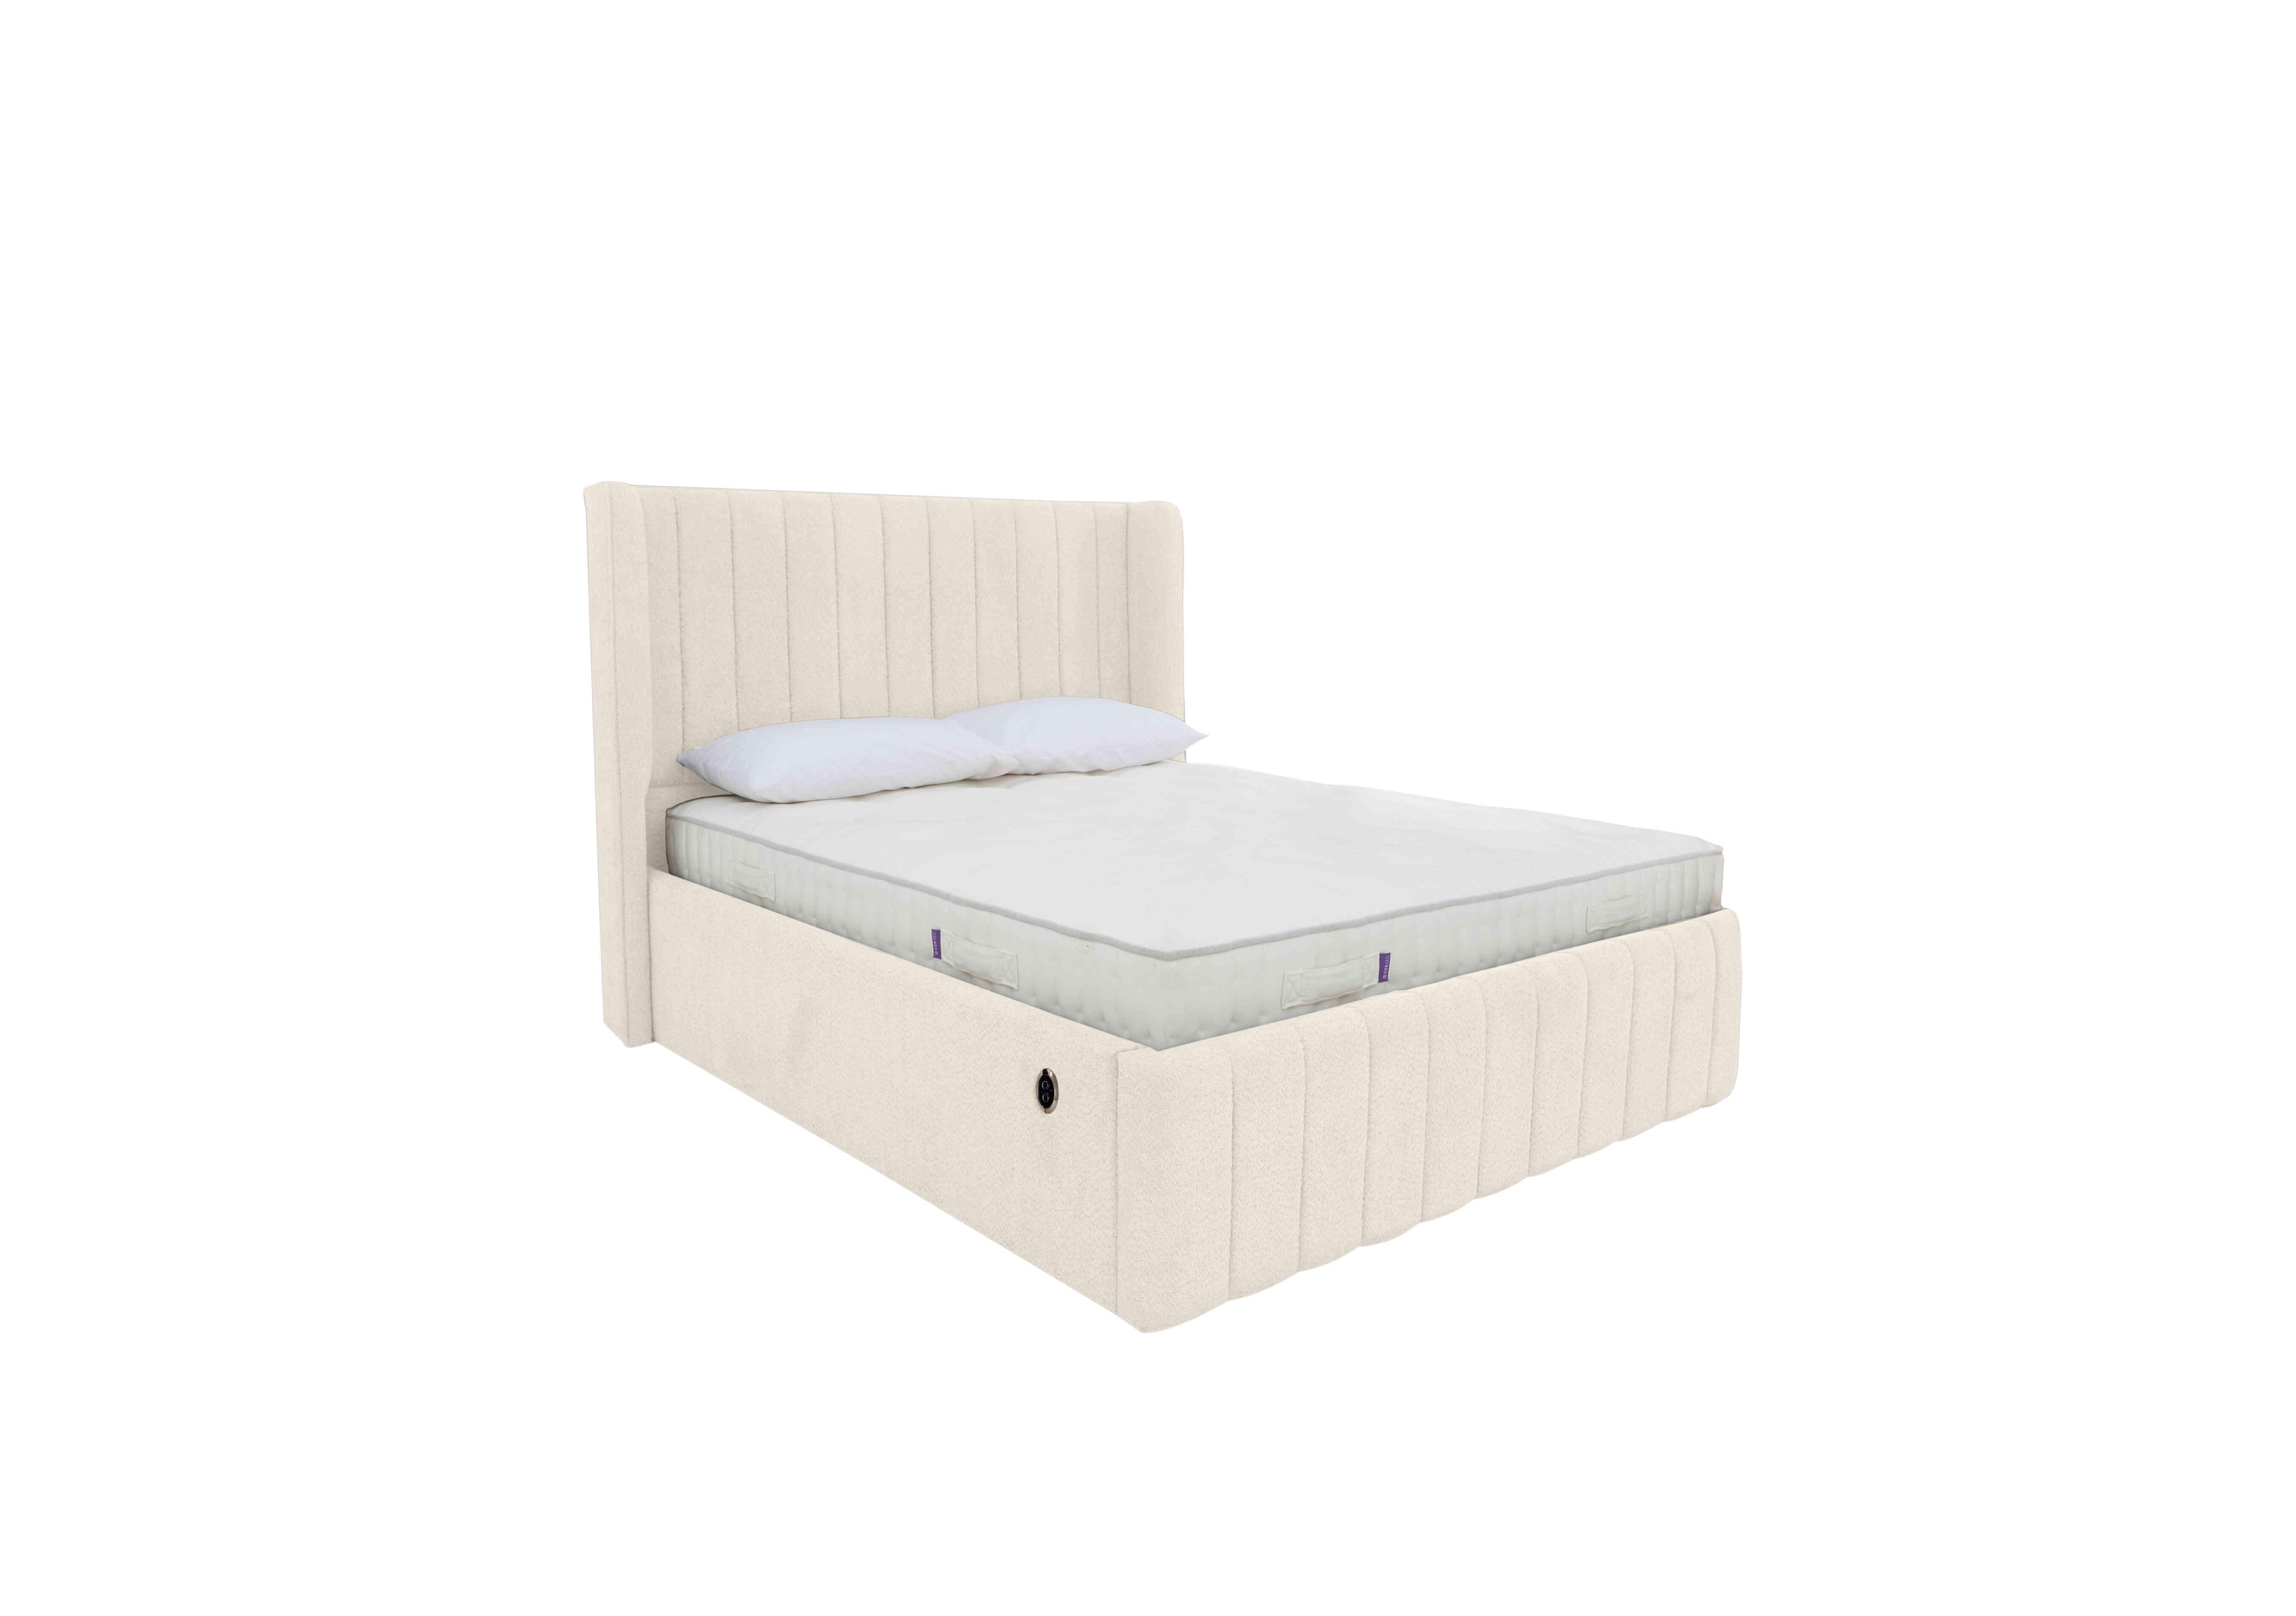 Eira Low Foot End Electric Ottoman Bed Frame in Comfy Oat on Furniture Village